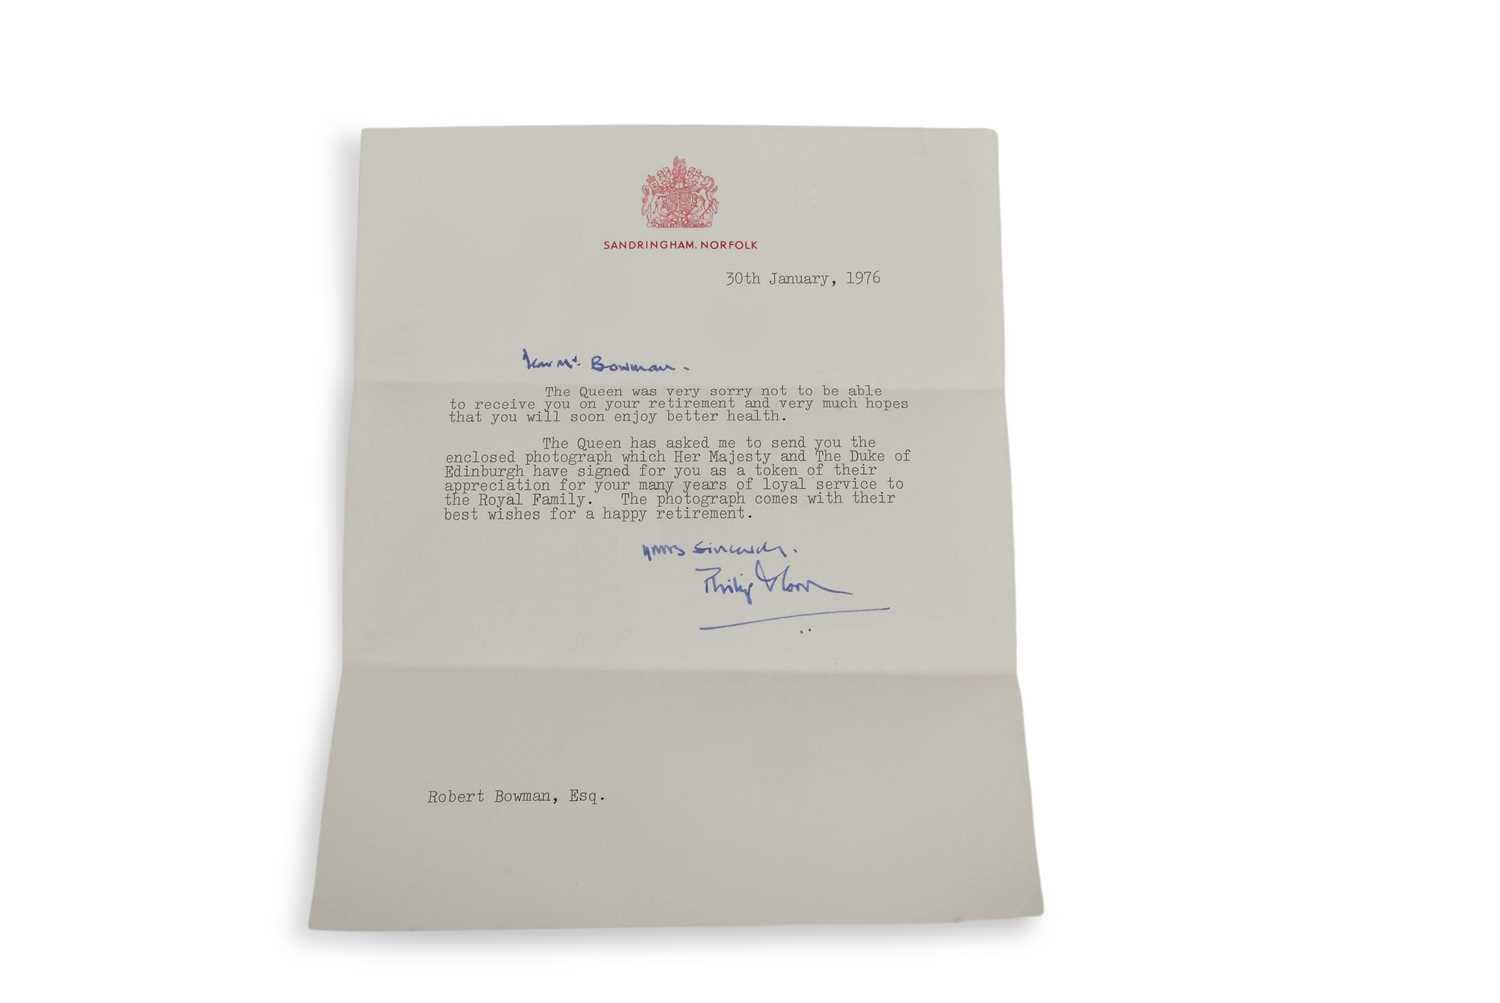 A framed signed photograph of Elizabeth II and Prince Philip dated 1976 together with a letter - Image 2 of 2